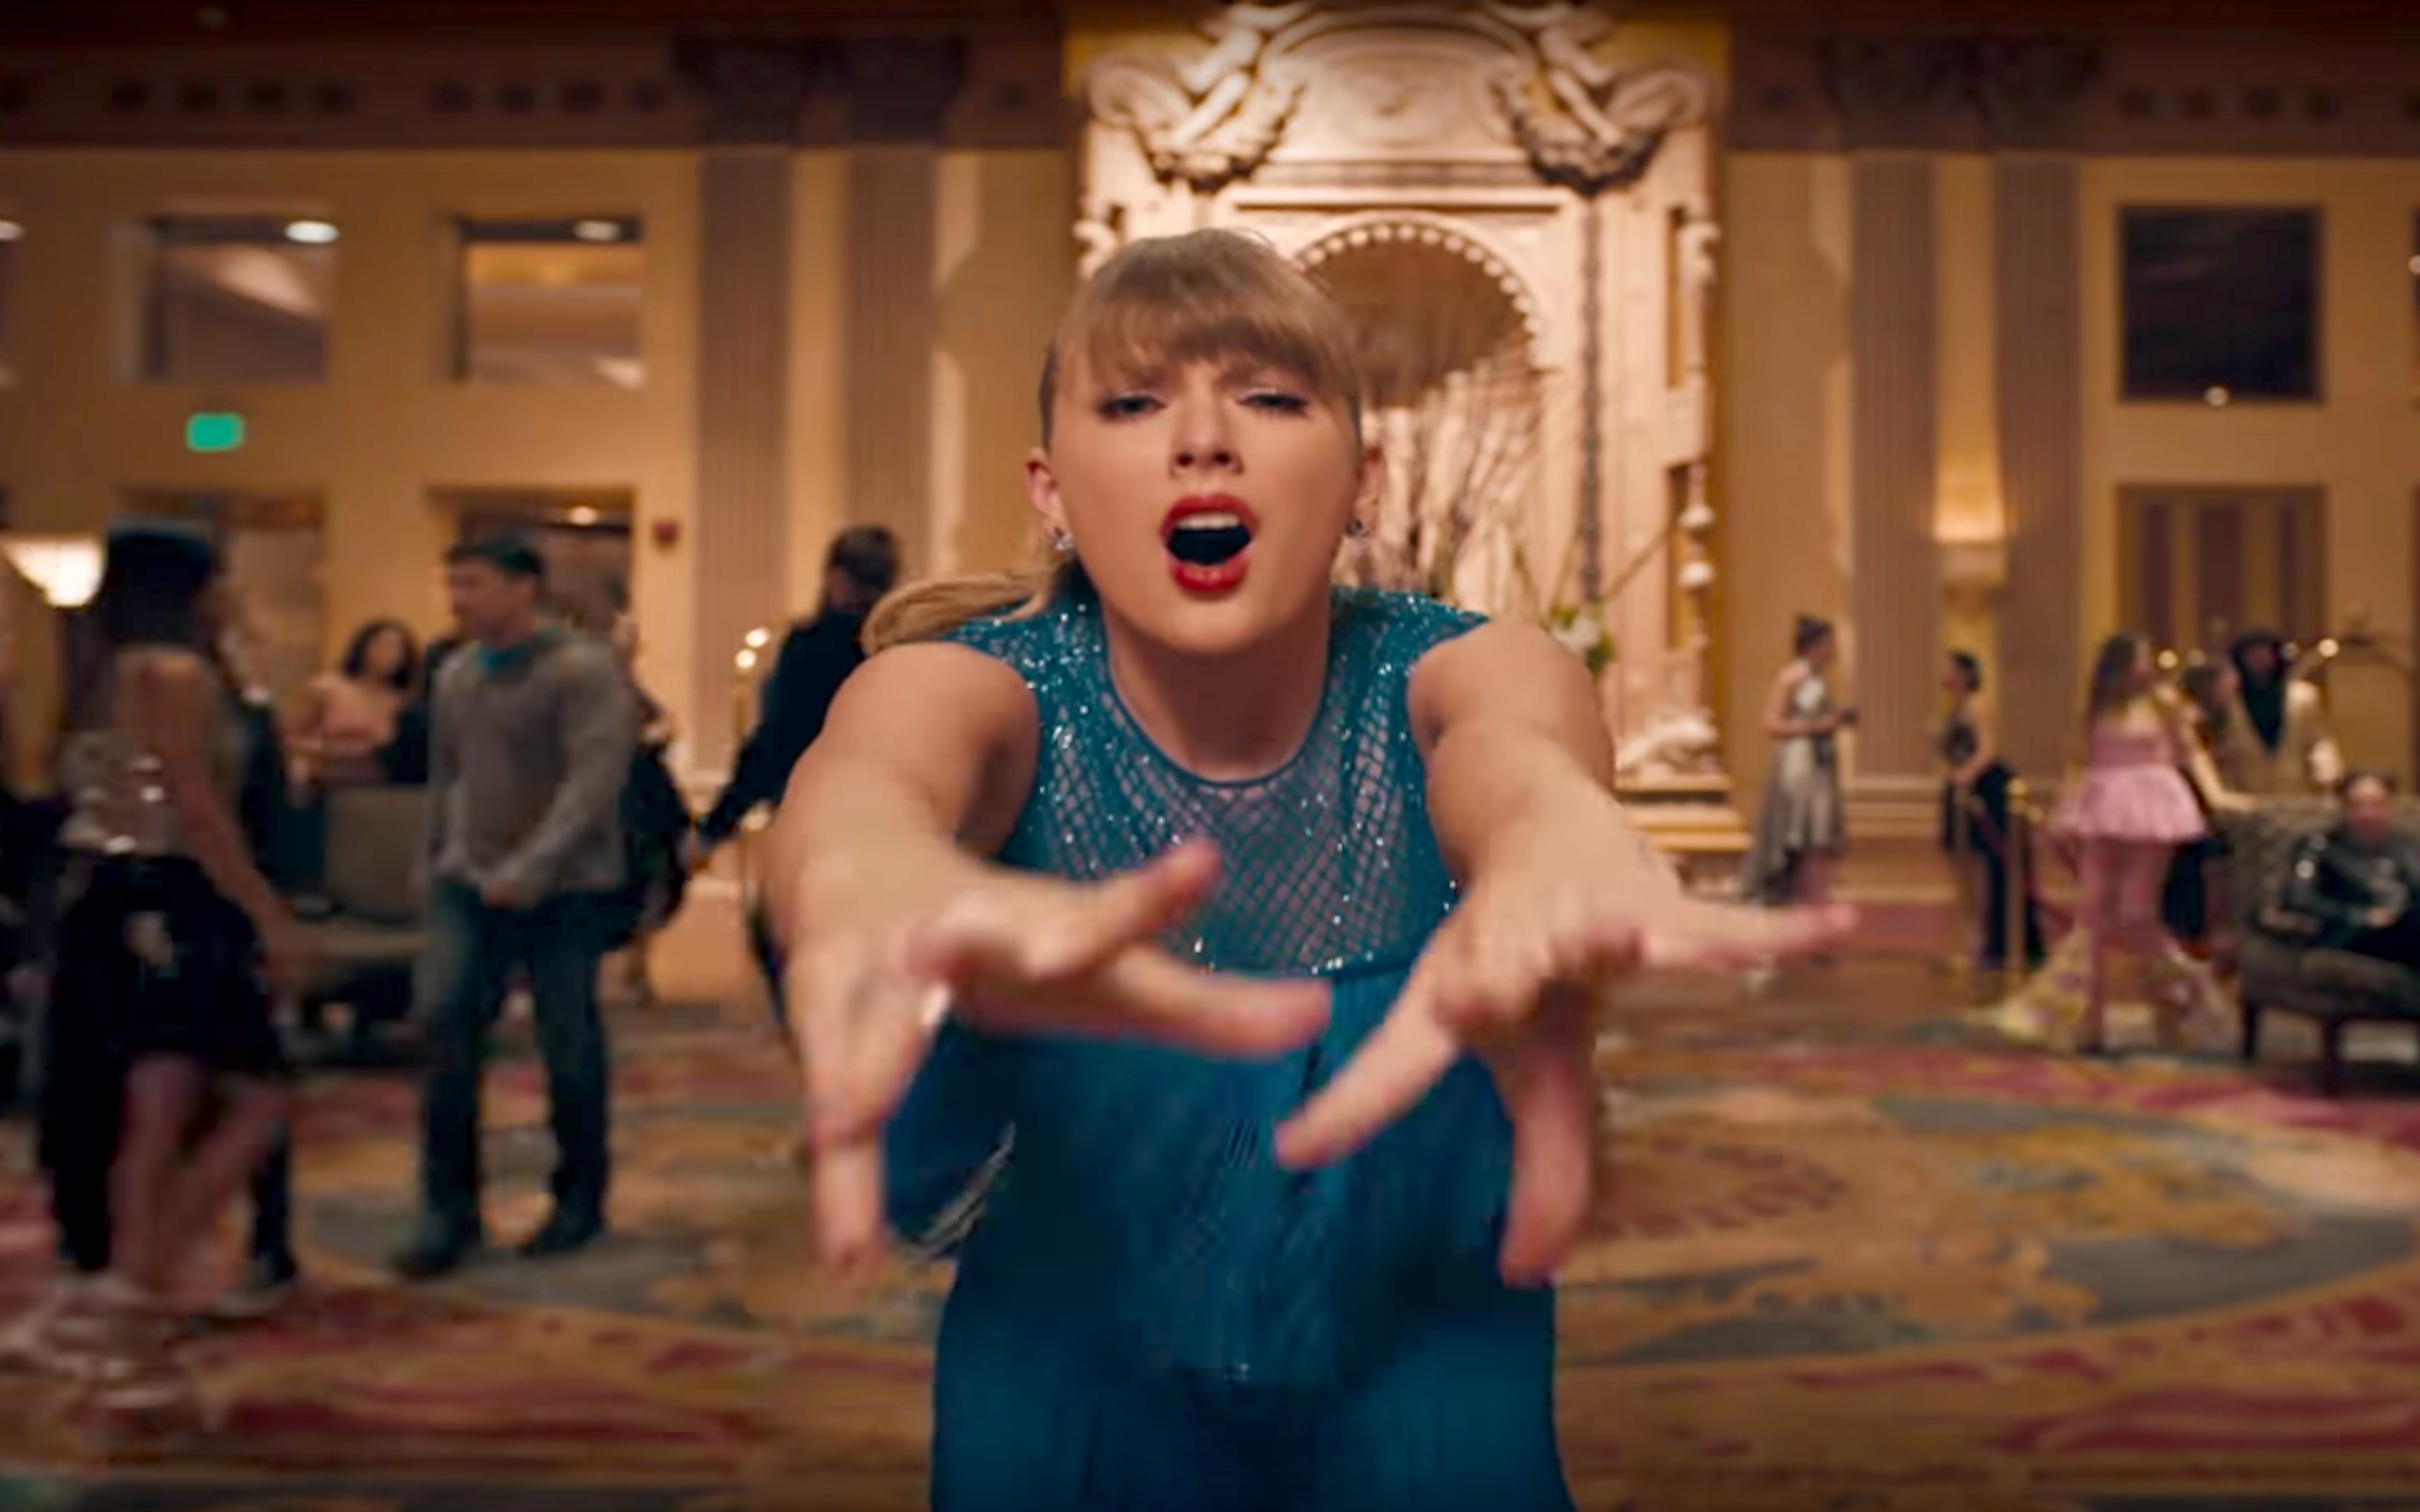 Is Taylor Swift's 'Delicate' Music Video A Rip Off?